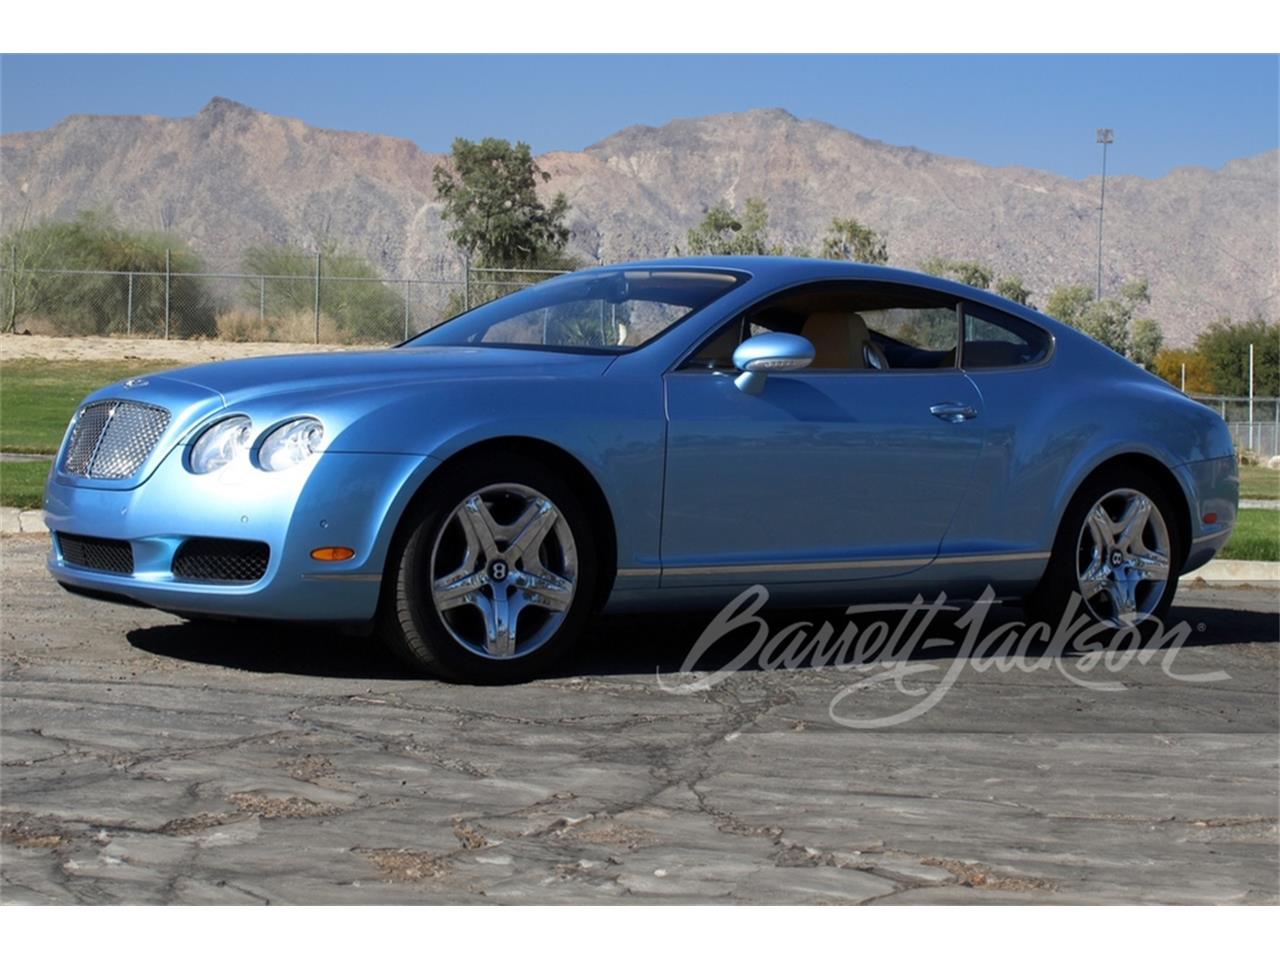 For Sale at Auction: 2006 Bentley Continental in Scottsdale, Arizona for sale in Scottsdale, AZ